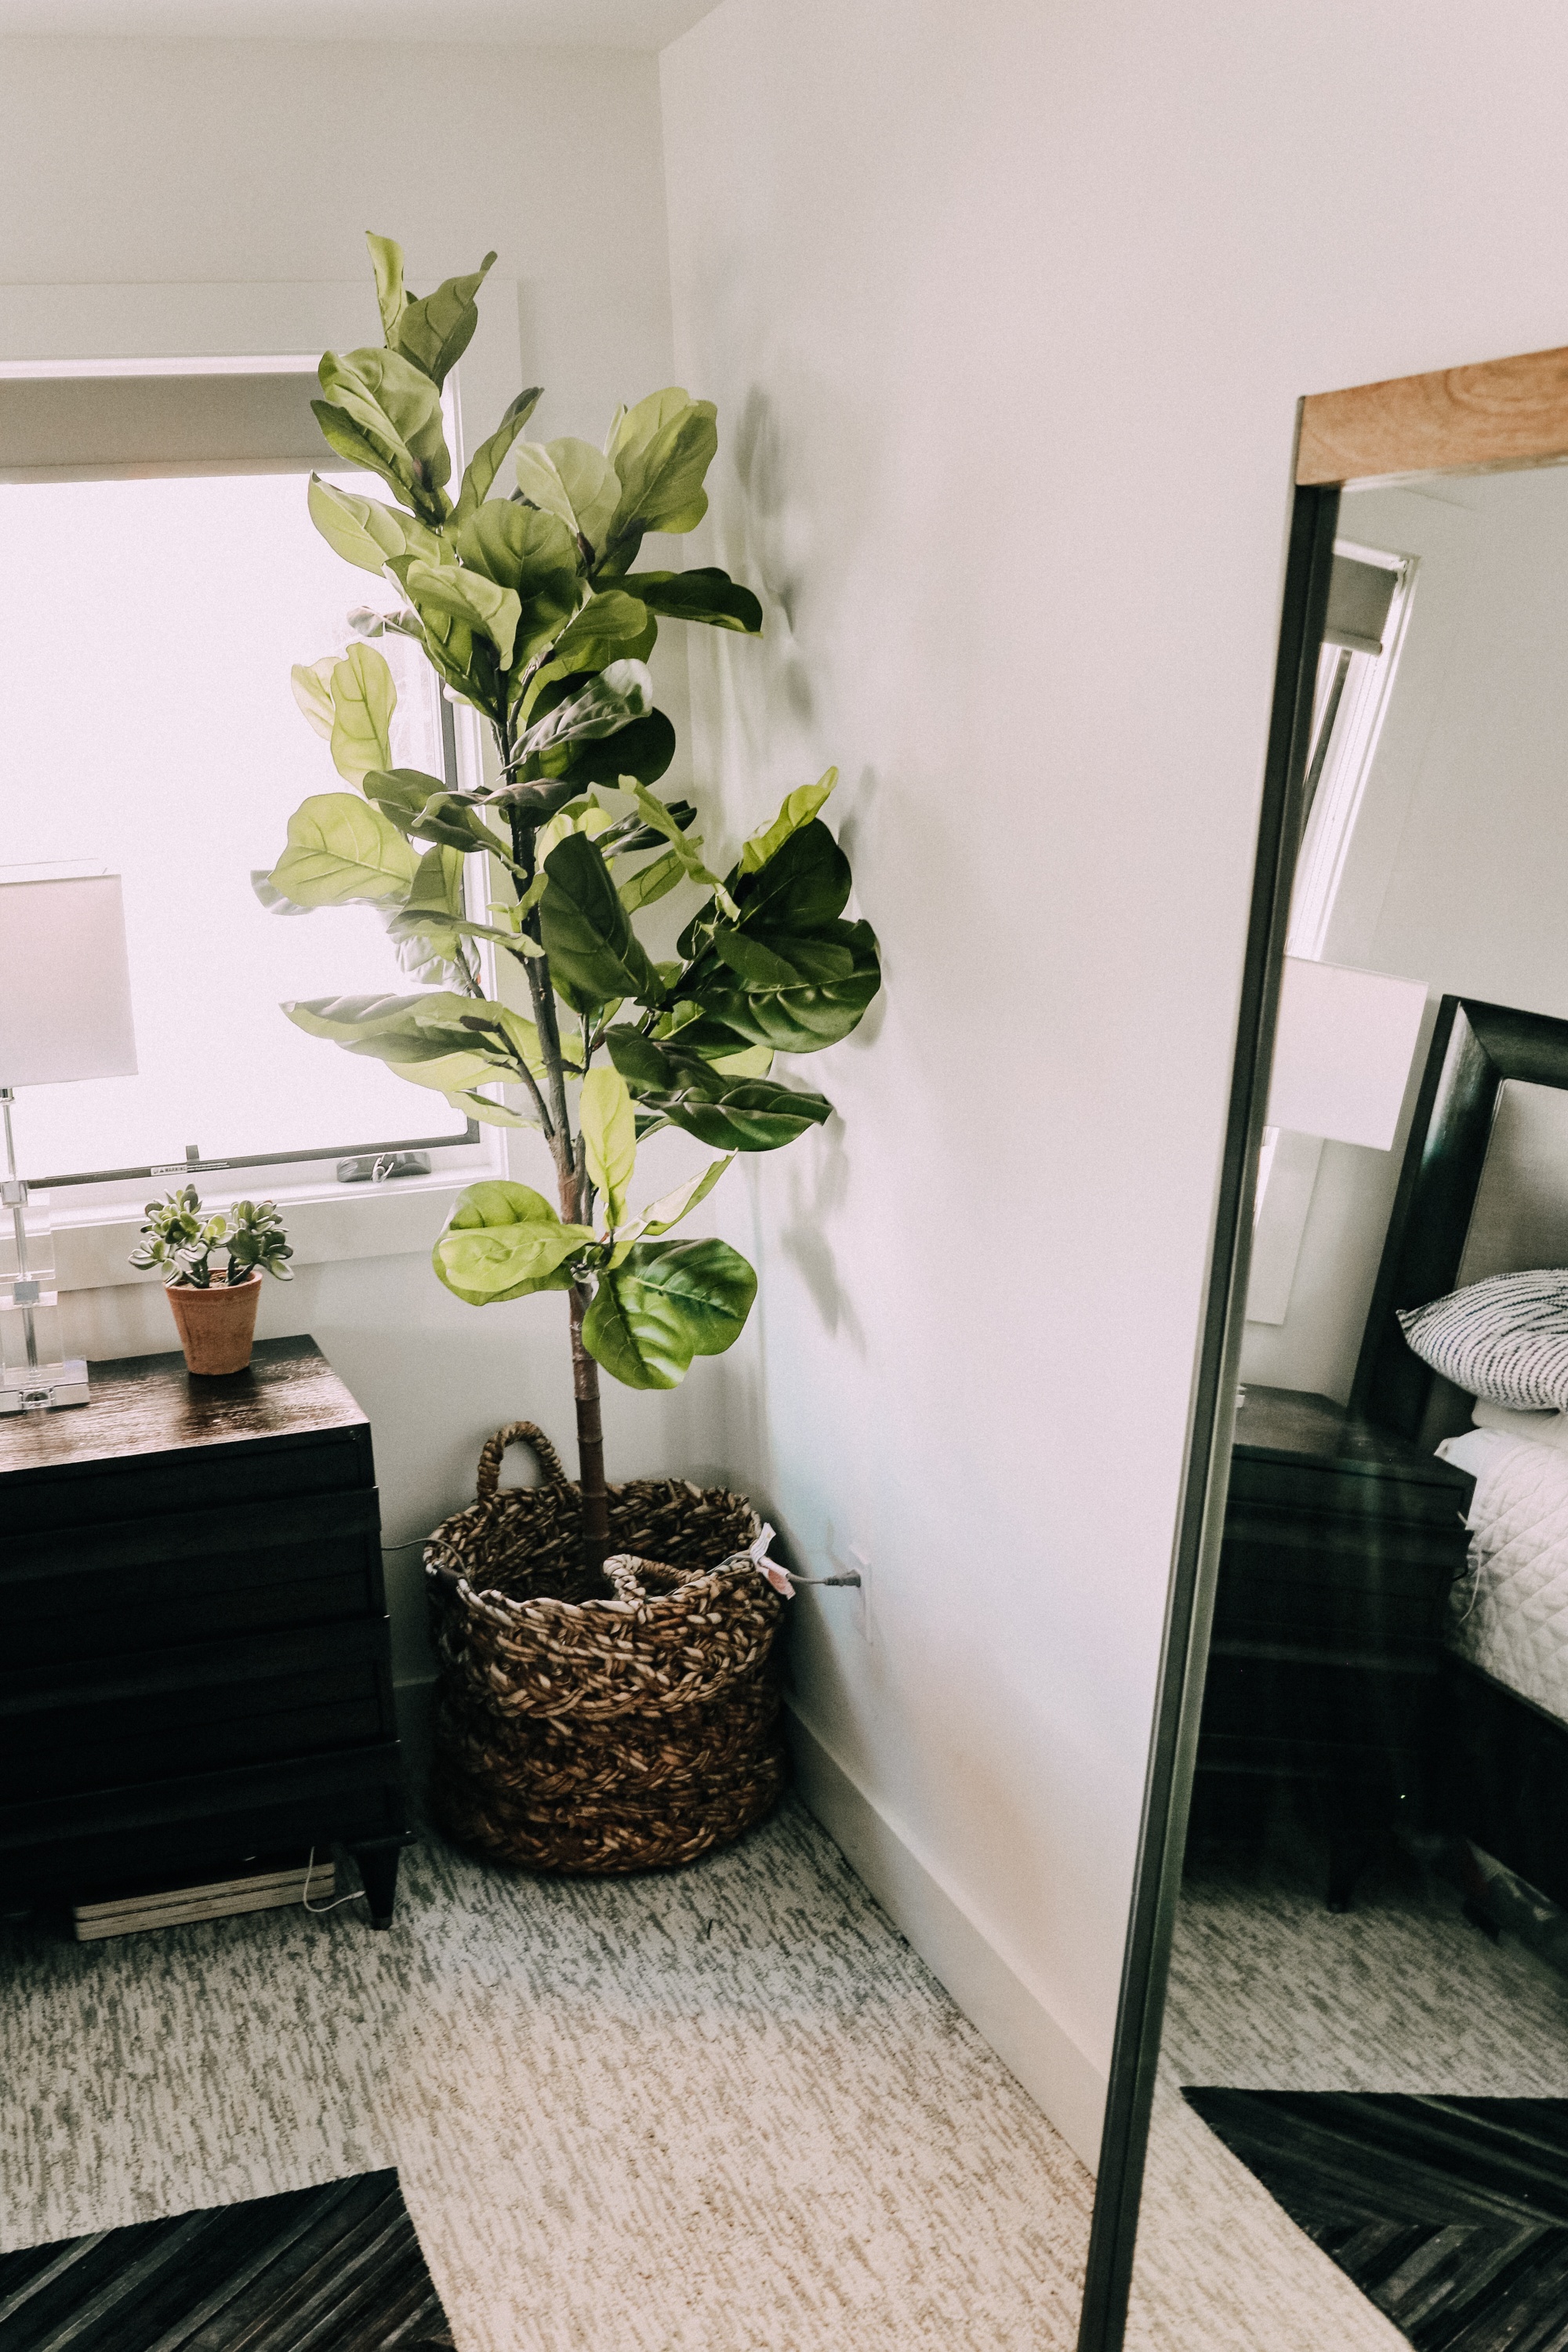 How To Find The Most Real Looking Artificial Plants